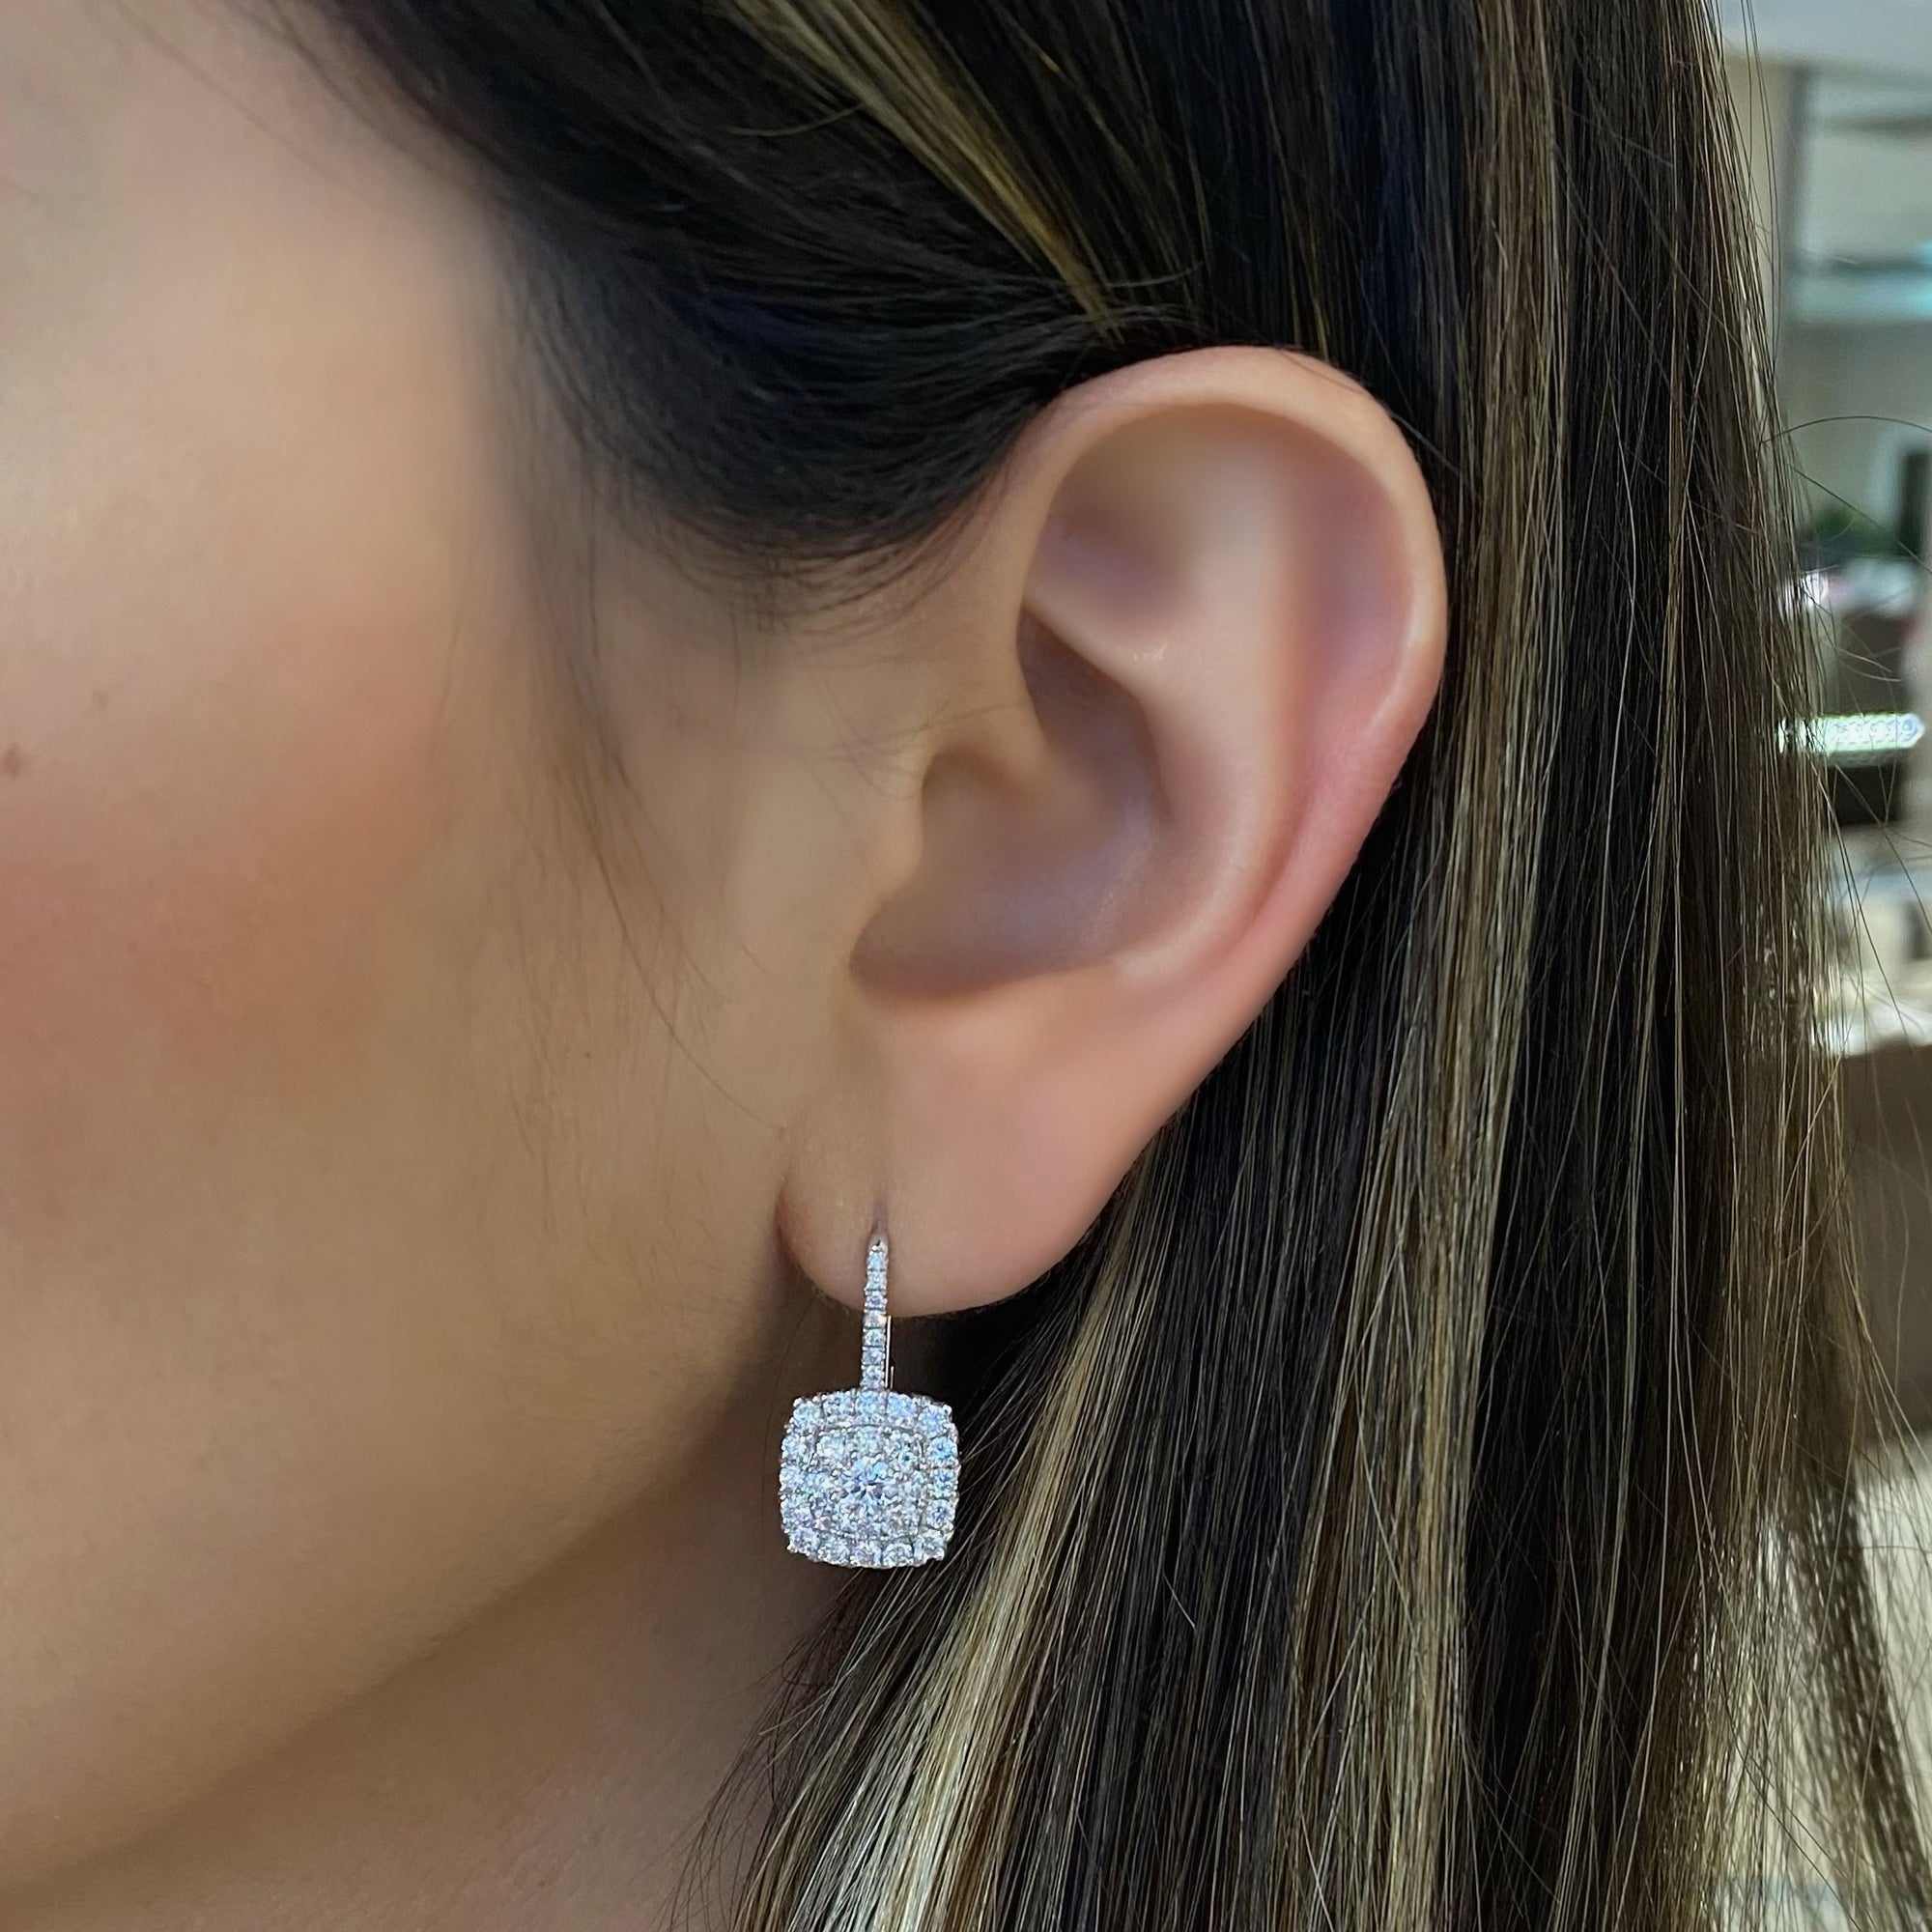 Diamond Cushion Lever-Back Earrings  - 18K gold weighing 4.75 grams  - 62 round diamonds totaling 1.77 carats  - 2 round diamonds totaling 0.47 carats